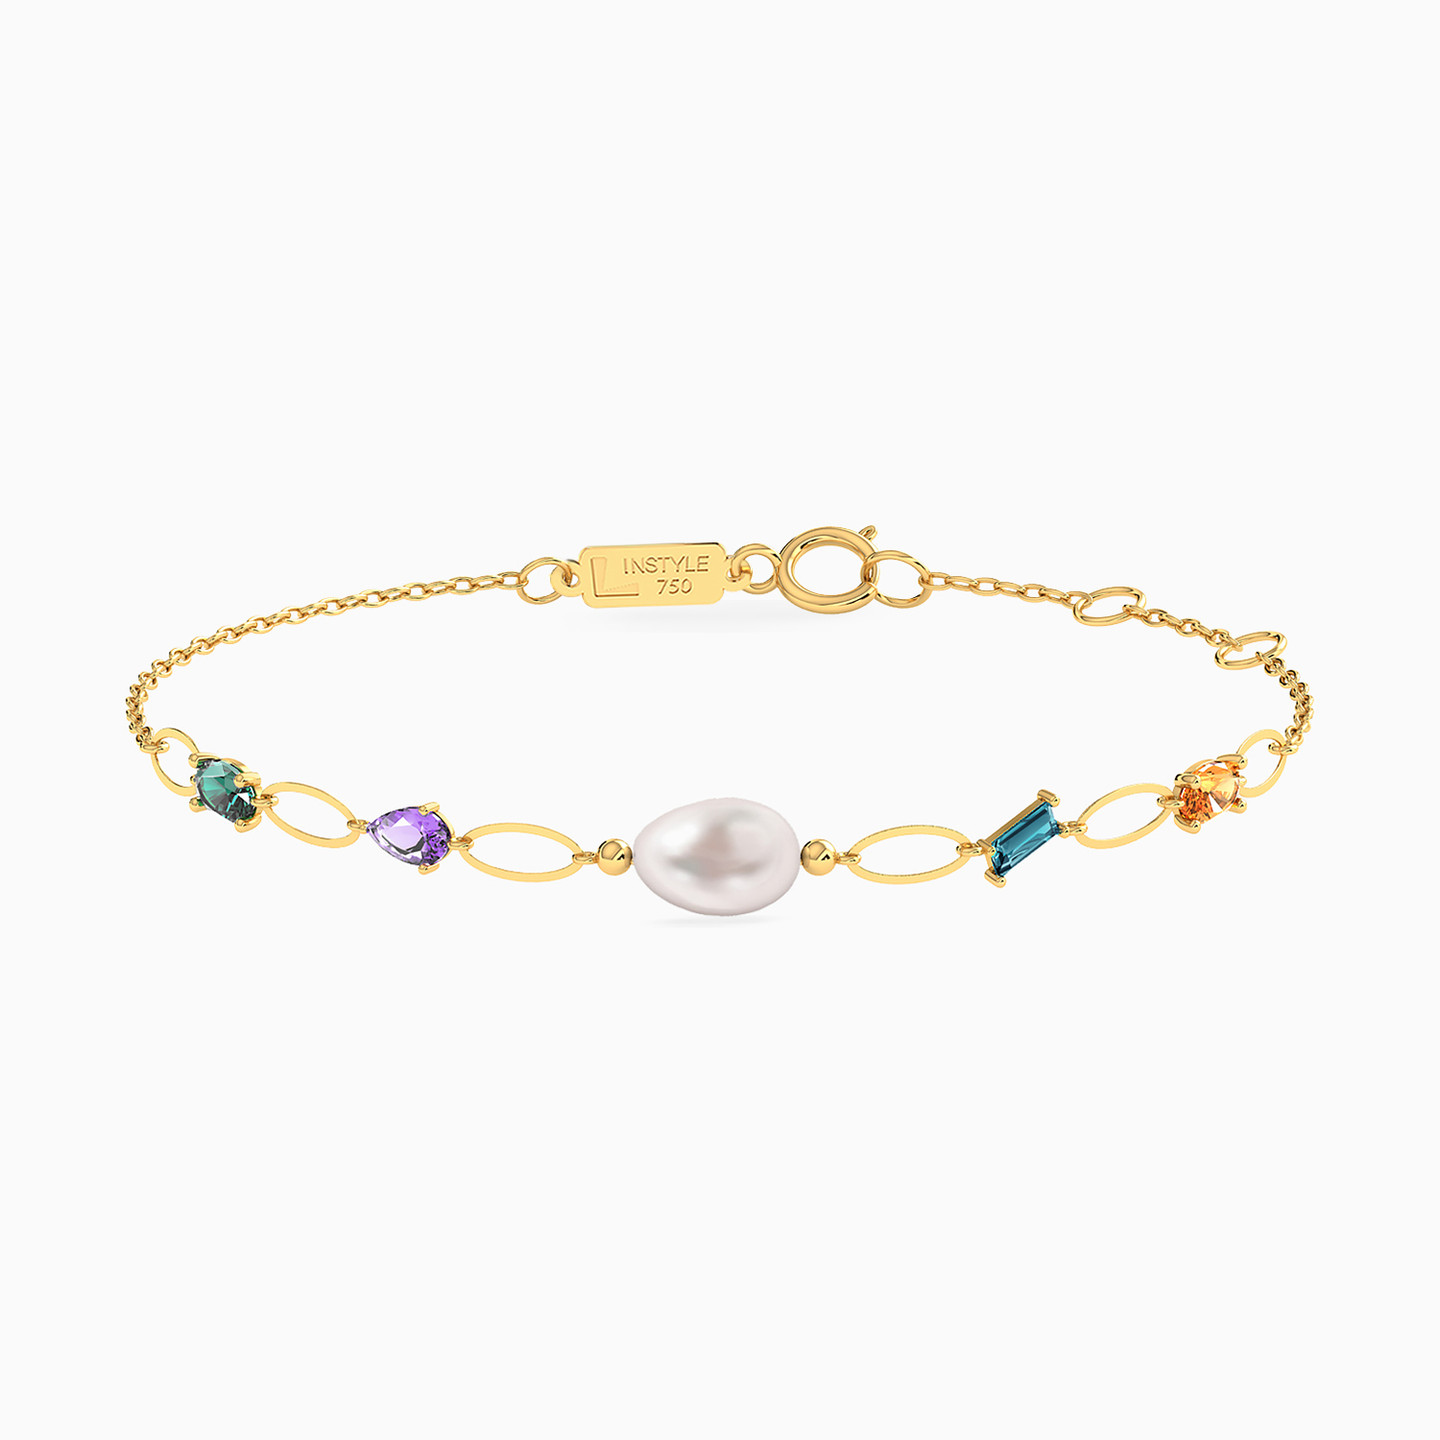 18K Gold Pearls & Colored Stones Chain Bracelet